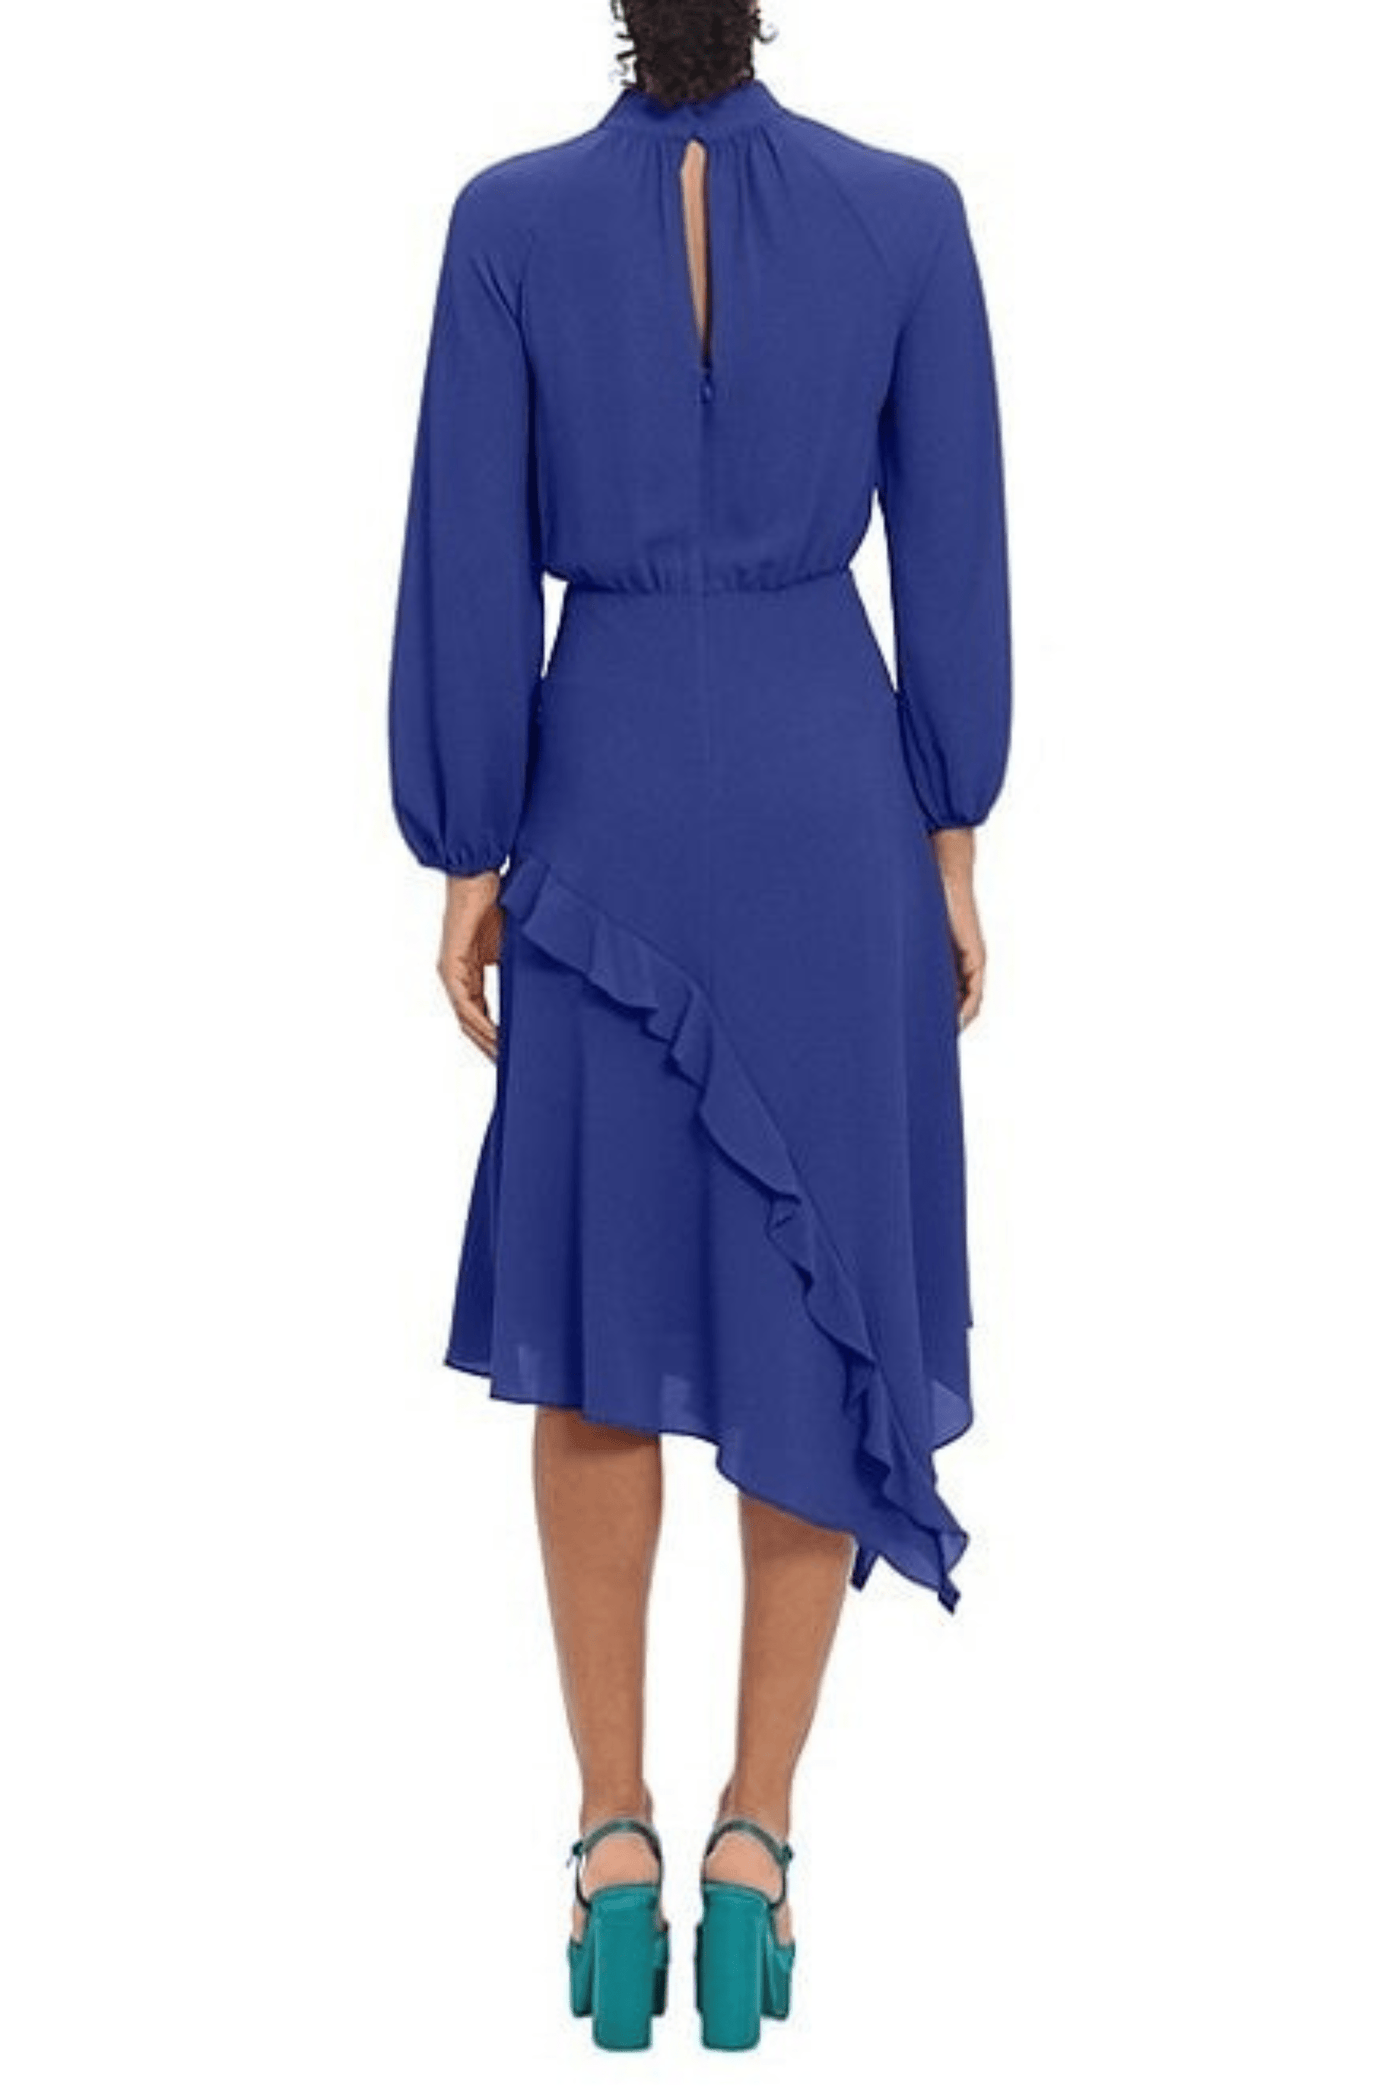 Donna Morgan D8127M - High Neck Ruffle Dress Special Occasion Dresses